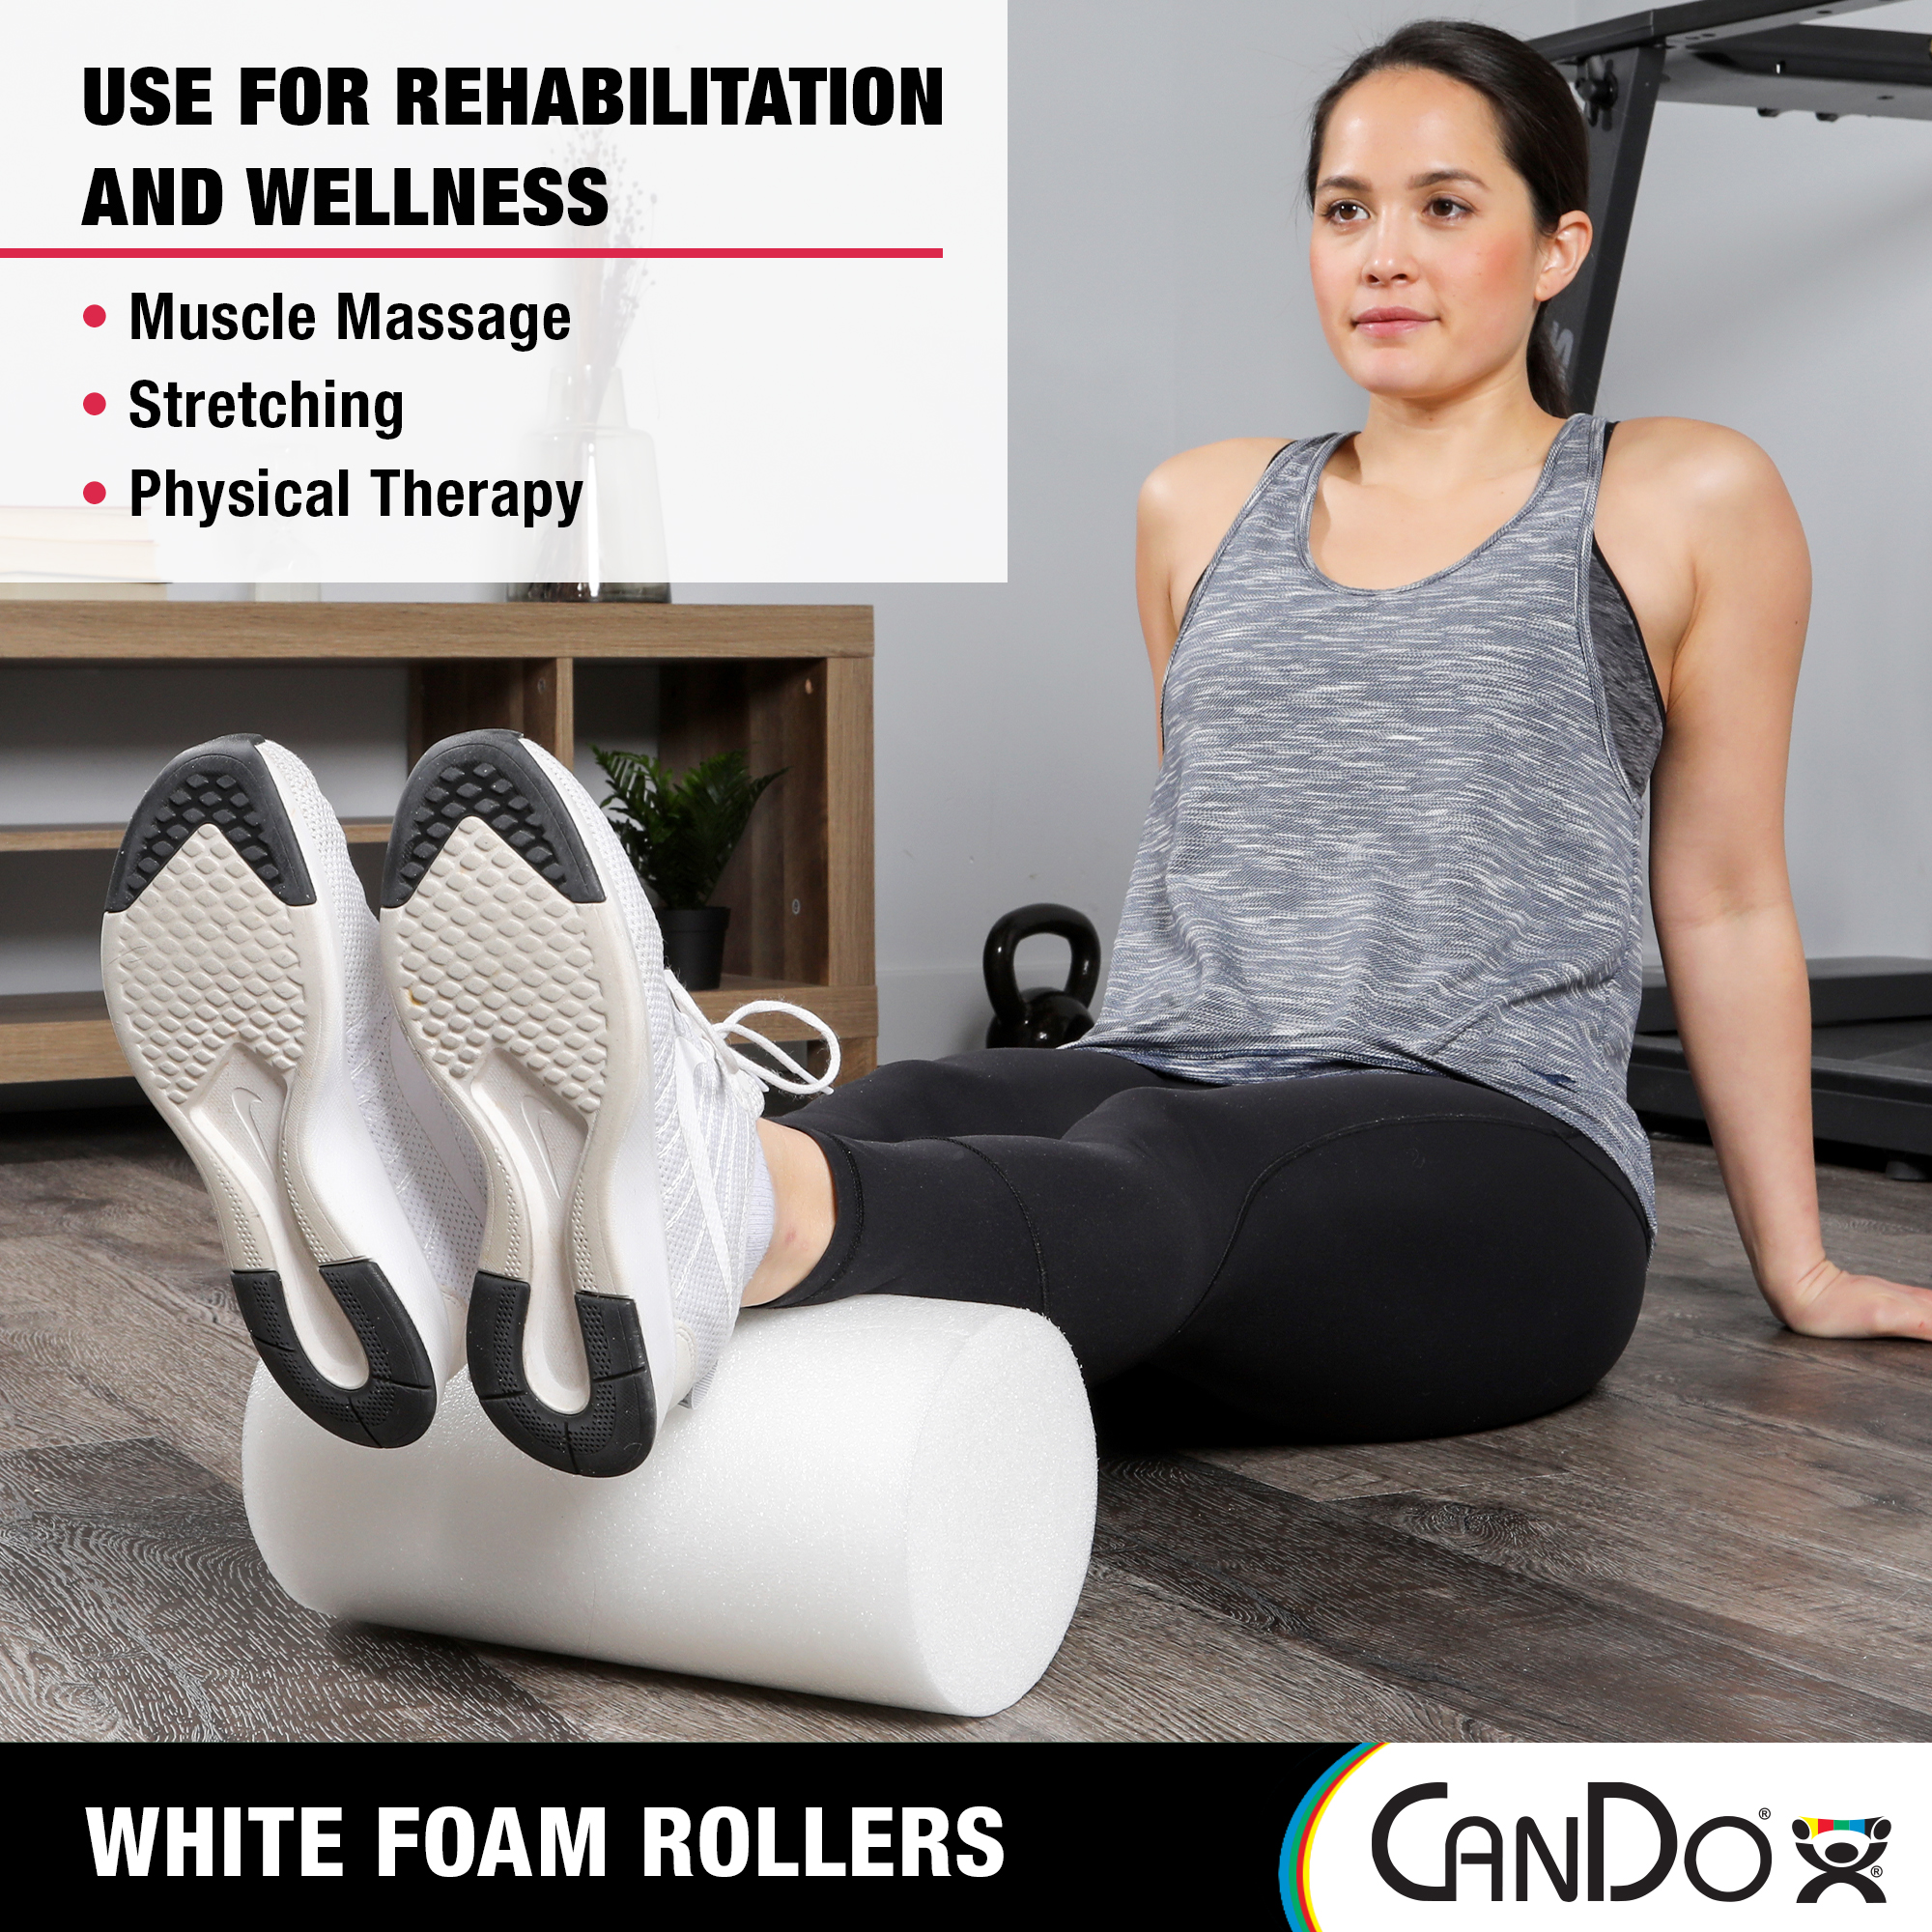 CanDo White PE Foam Rollers for Exercise, Finess, Muscle Restoration, Massage Therapy, Sport Recovery and Physical Therapy for Home, Clinics, Professional Therapy Round 6" x 36" - image 4 of 6